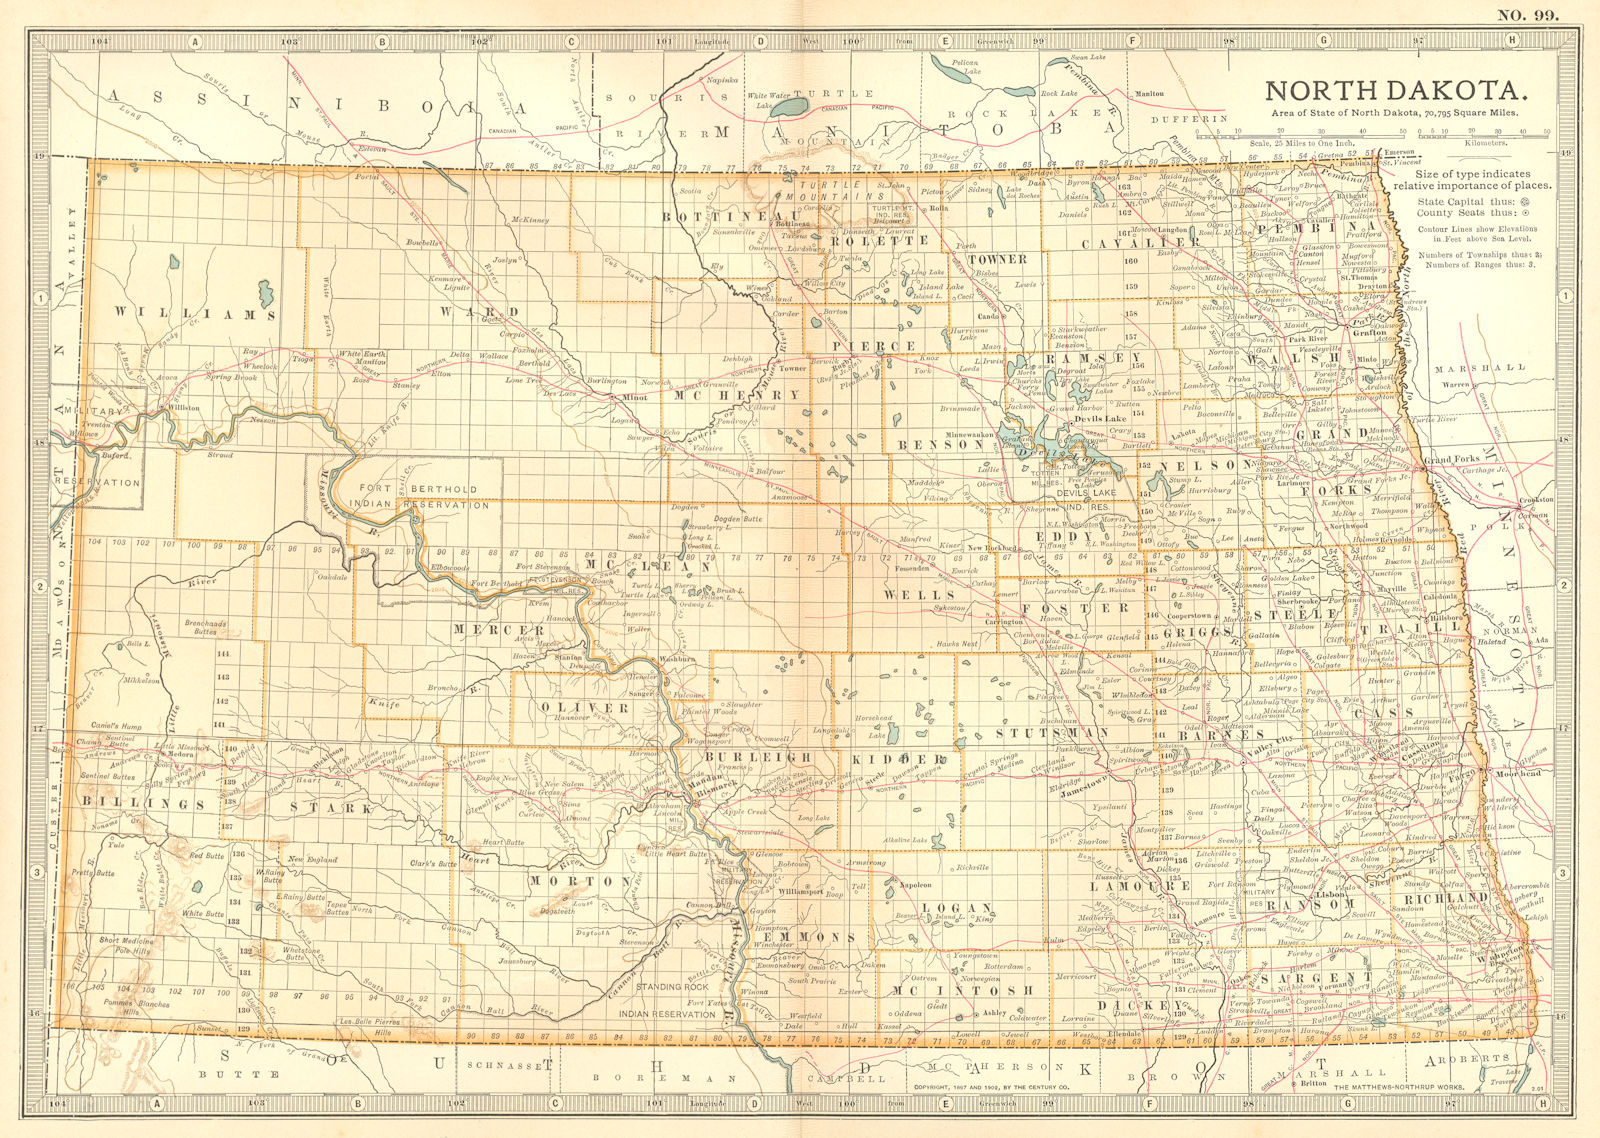 NORTH DAKOTA. State map.Shows counties & Indian reservations.Britannica 1903